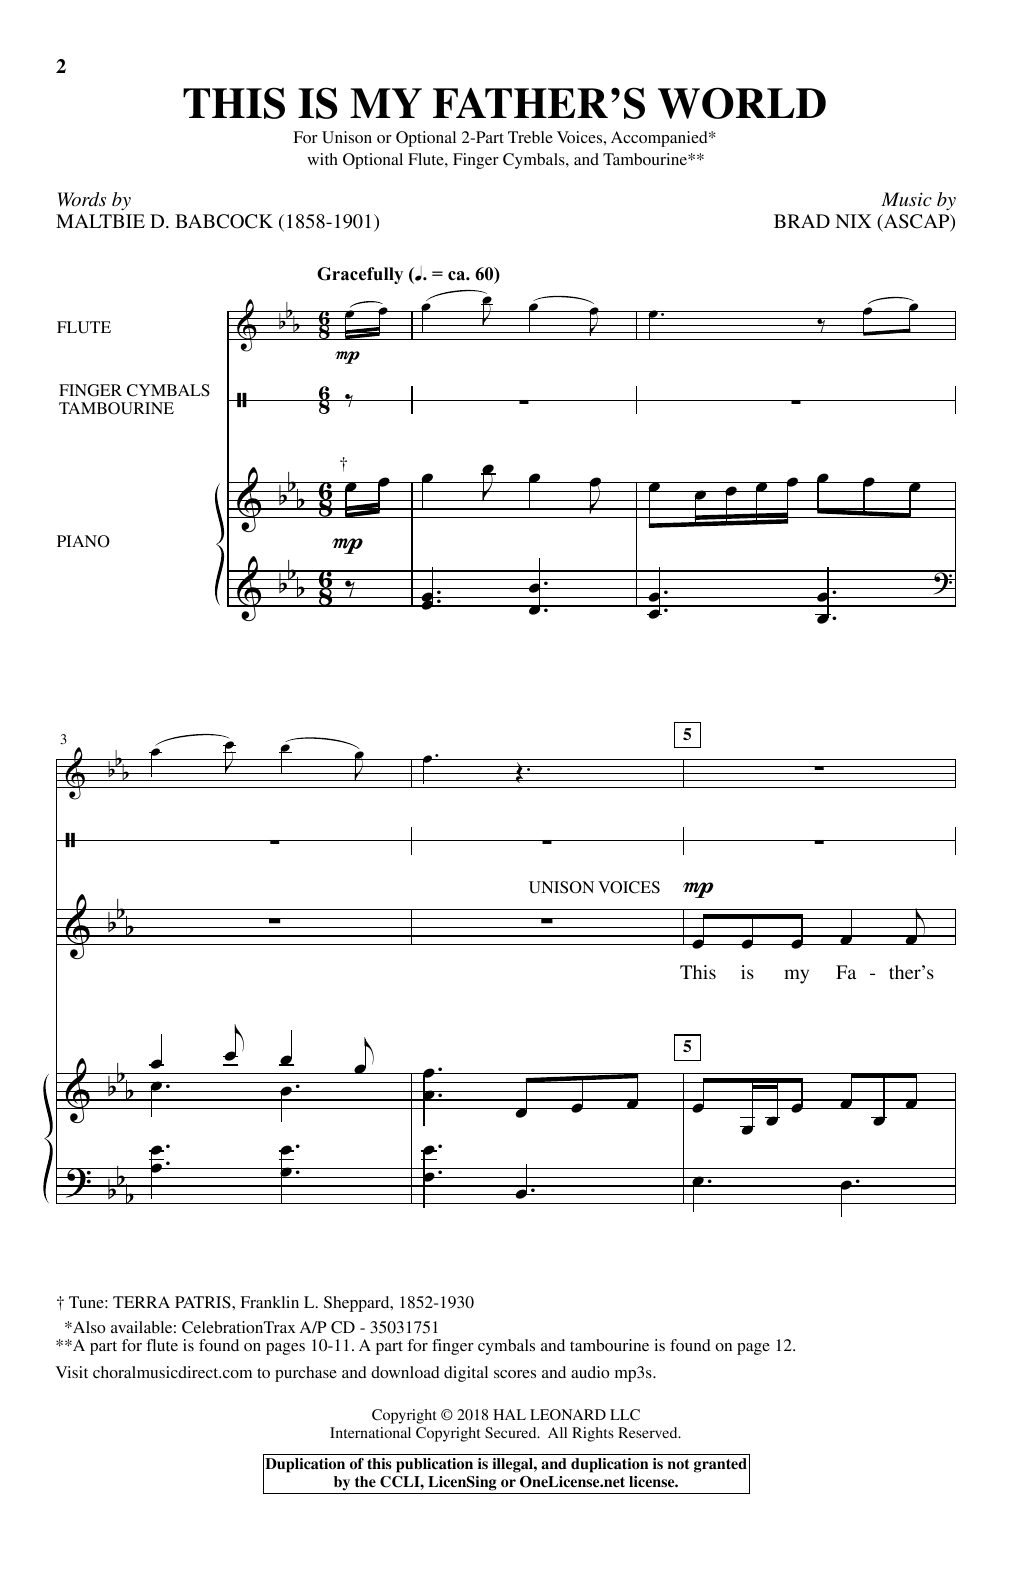 Download Brad Nix This Is My Father's World Sheet Music